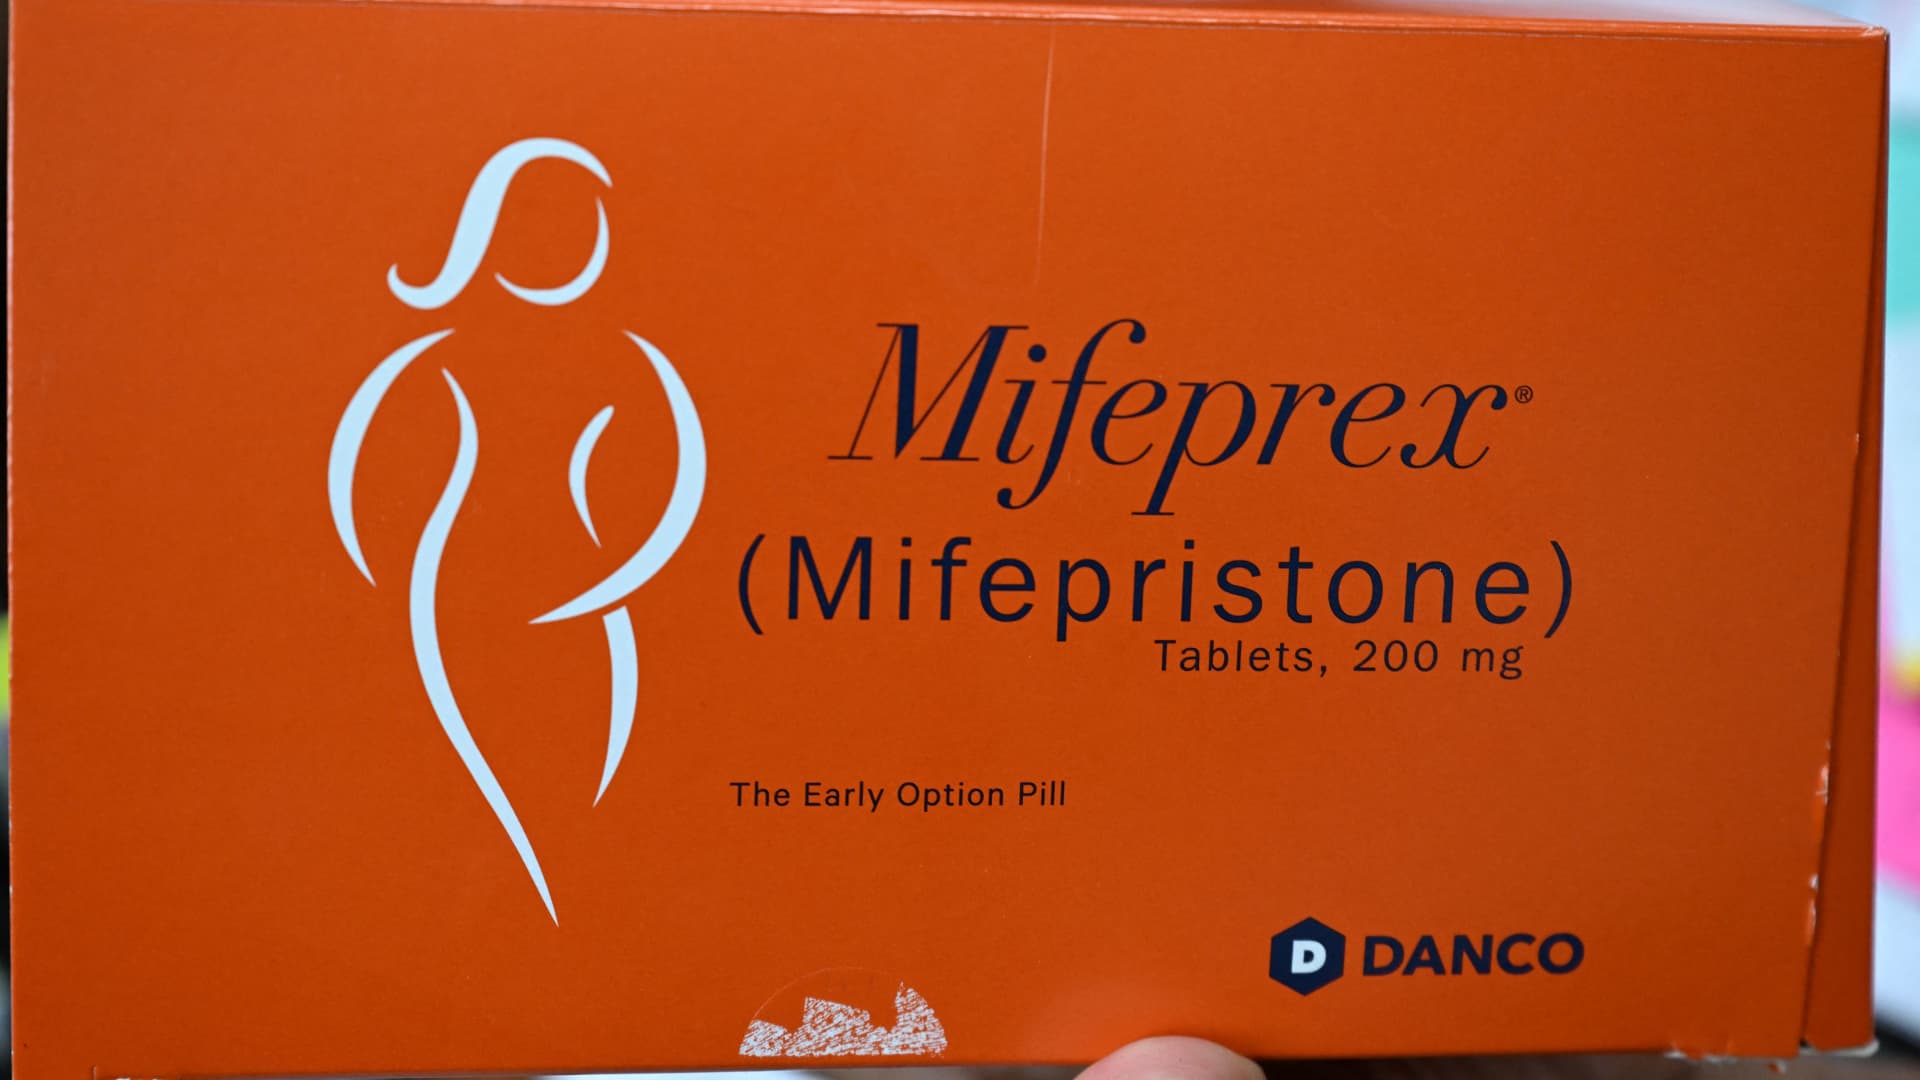 Key court ruling does not restrict abortion pill access in 17 states, federal judge says